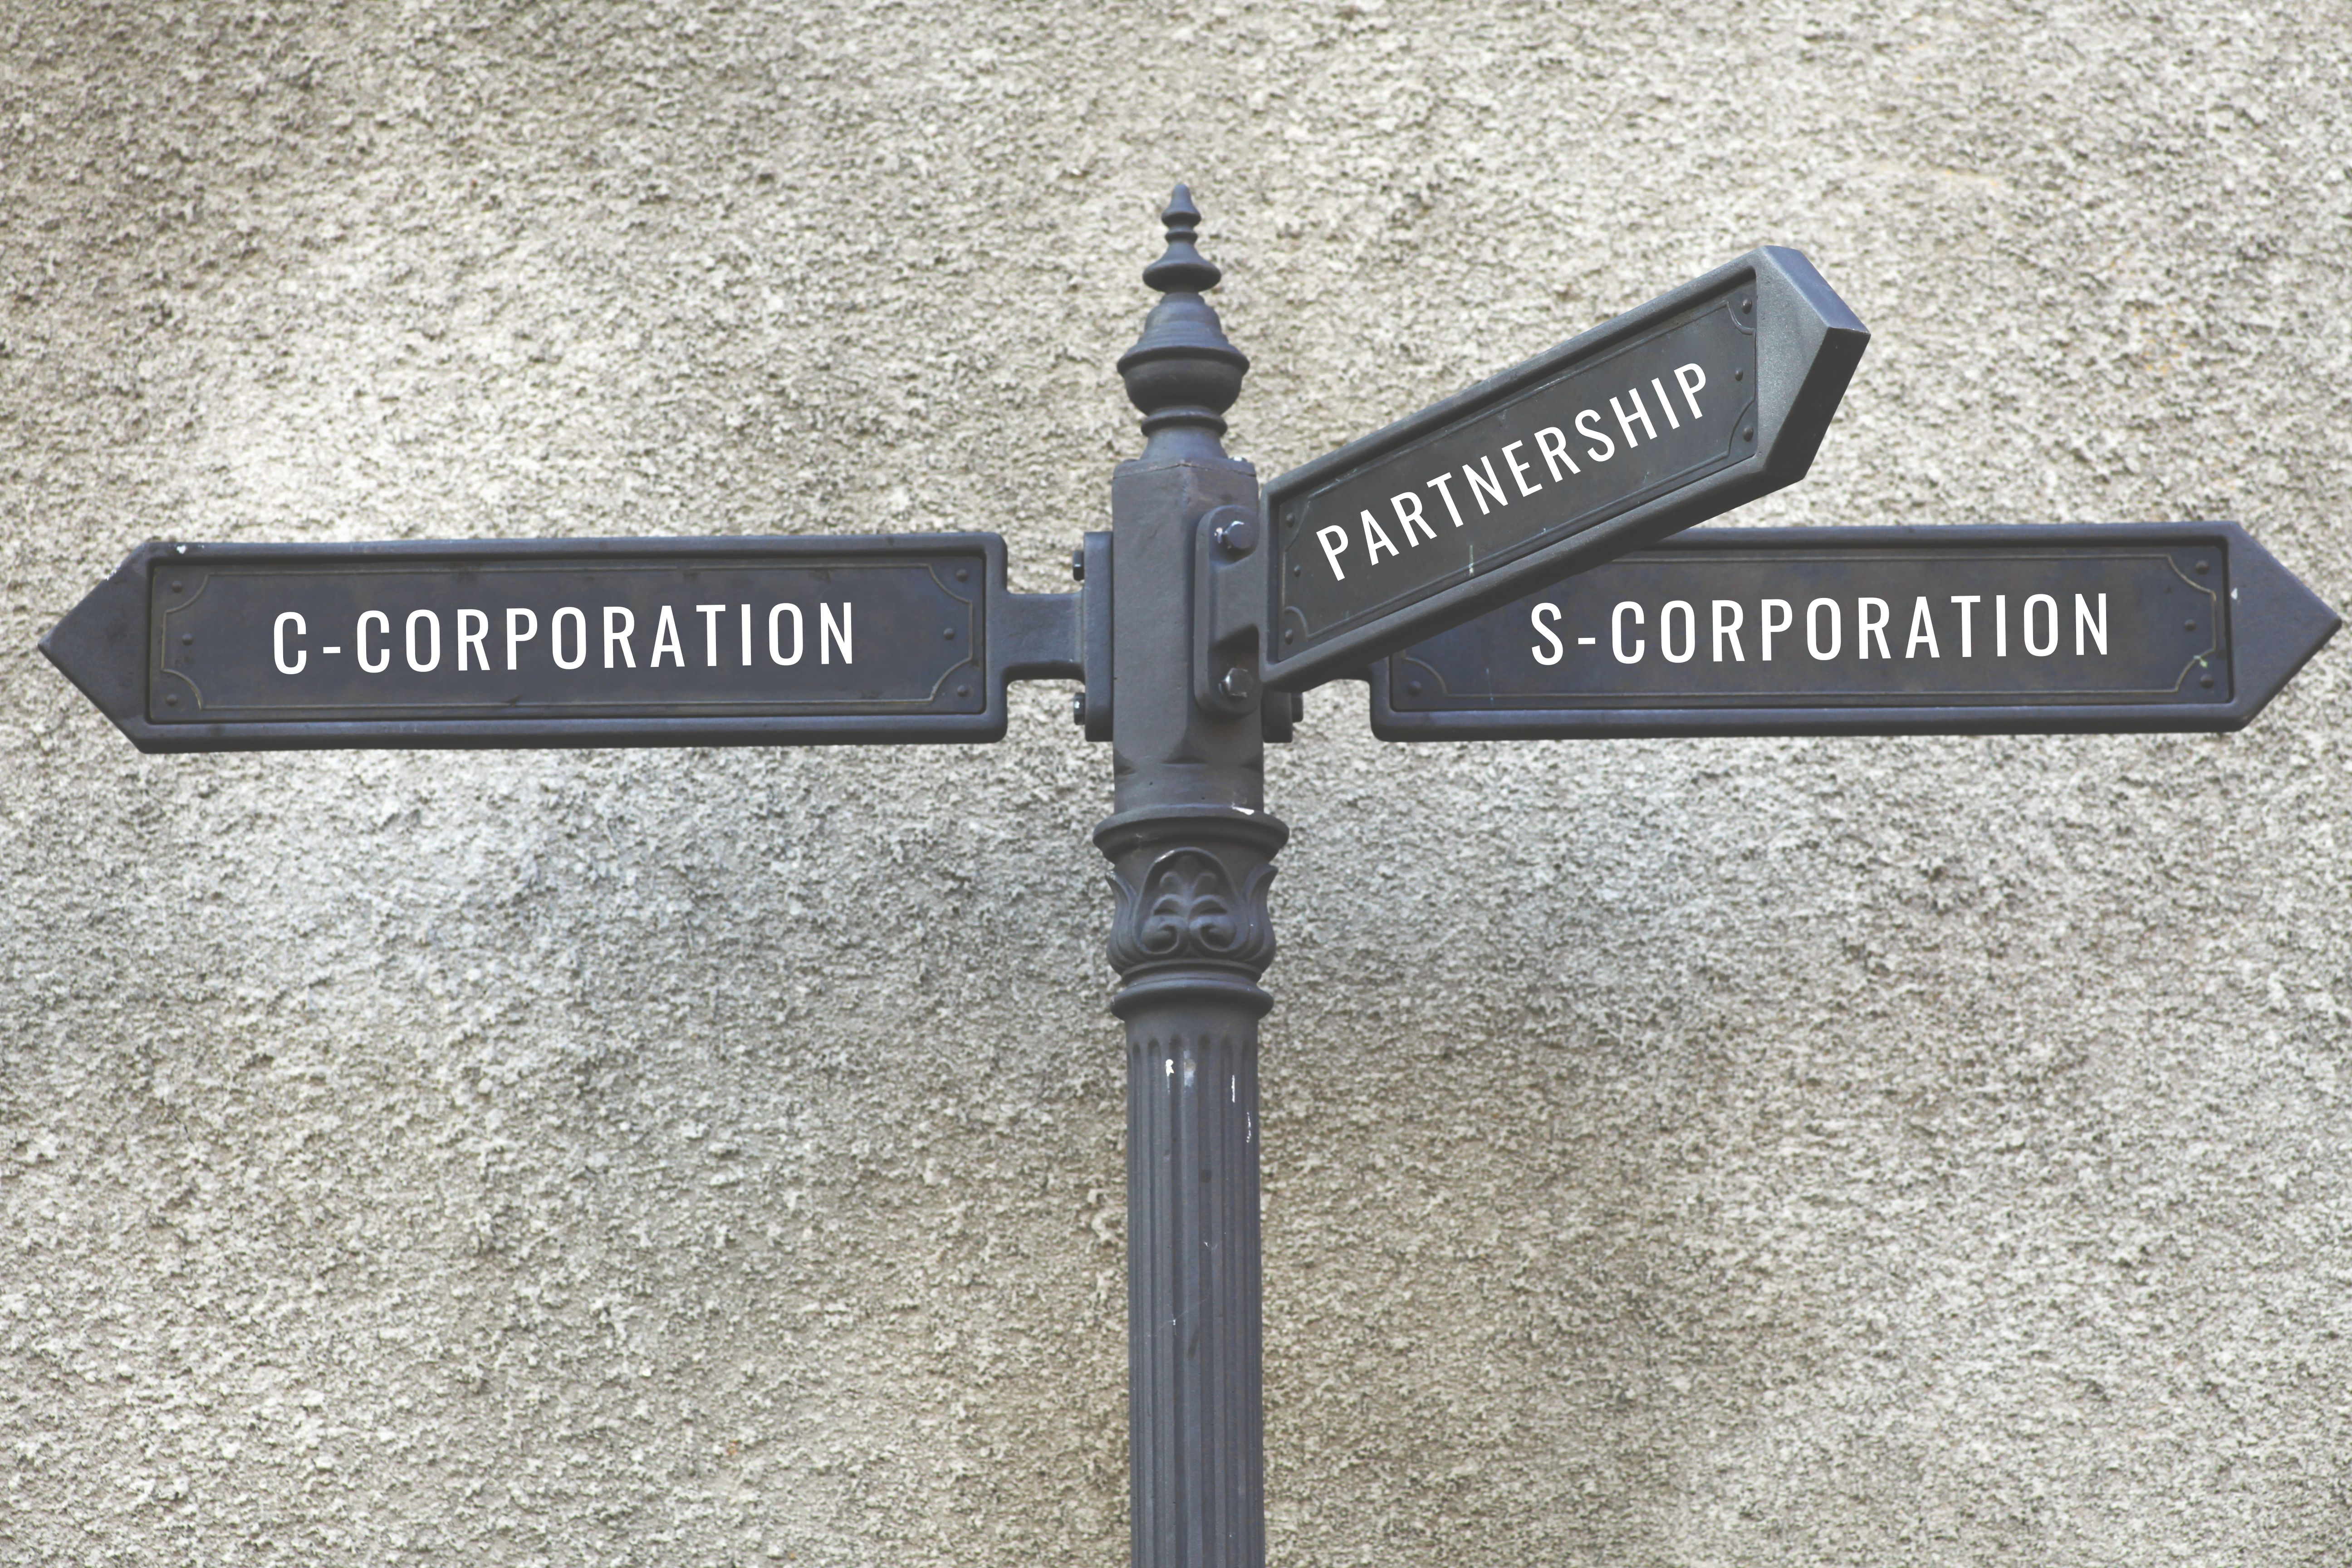 S-corp, Partnership, or C-corp: Which is right for your small business growth?